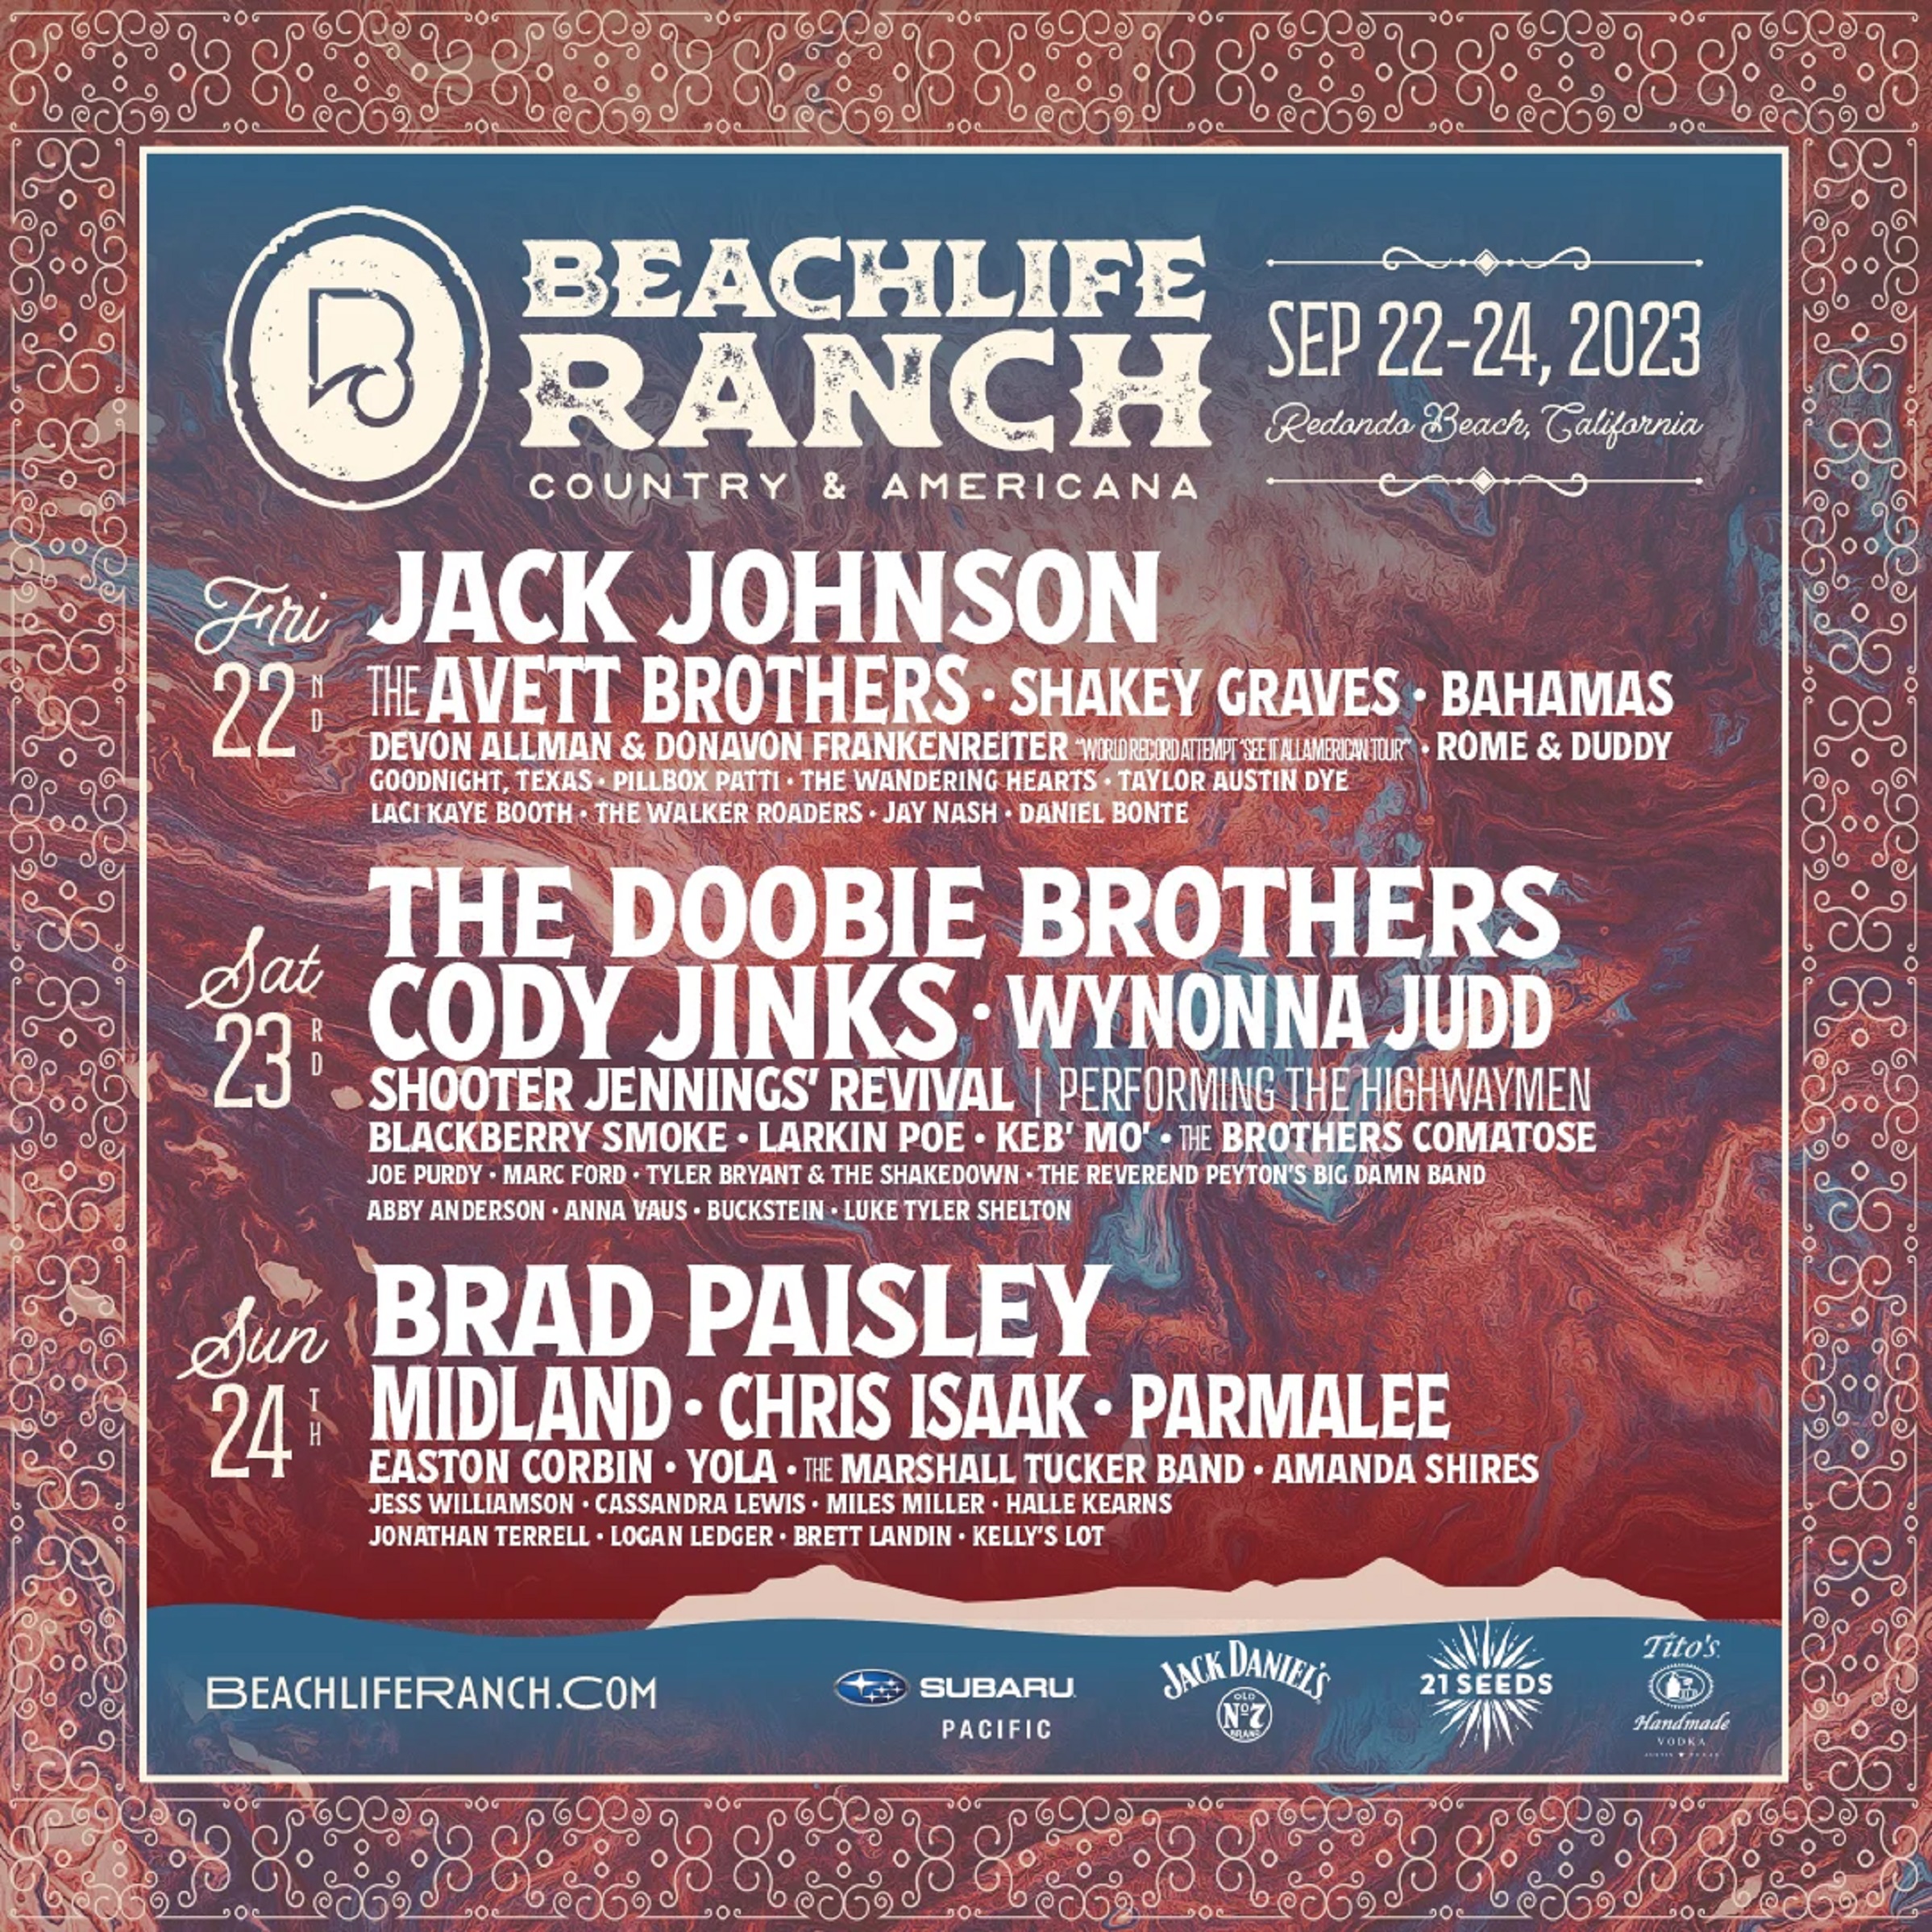 BeachLife Ranch Aligning with Several Nonprofit Partners; Portion of Ticket Sales This Weekend to Benefit Maui Relief Efforts